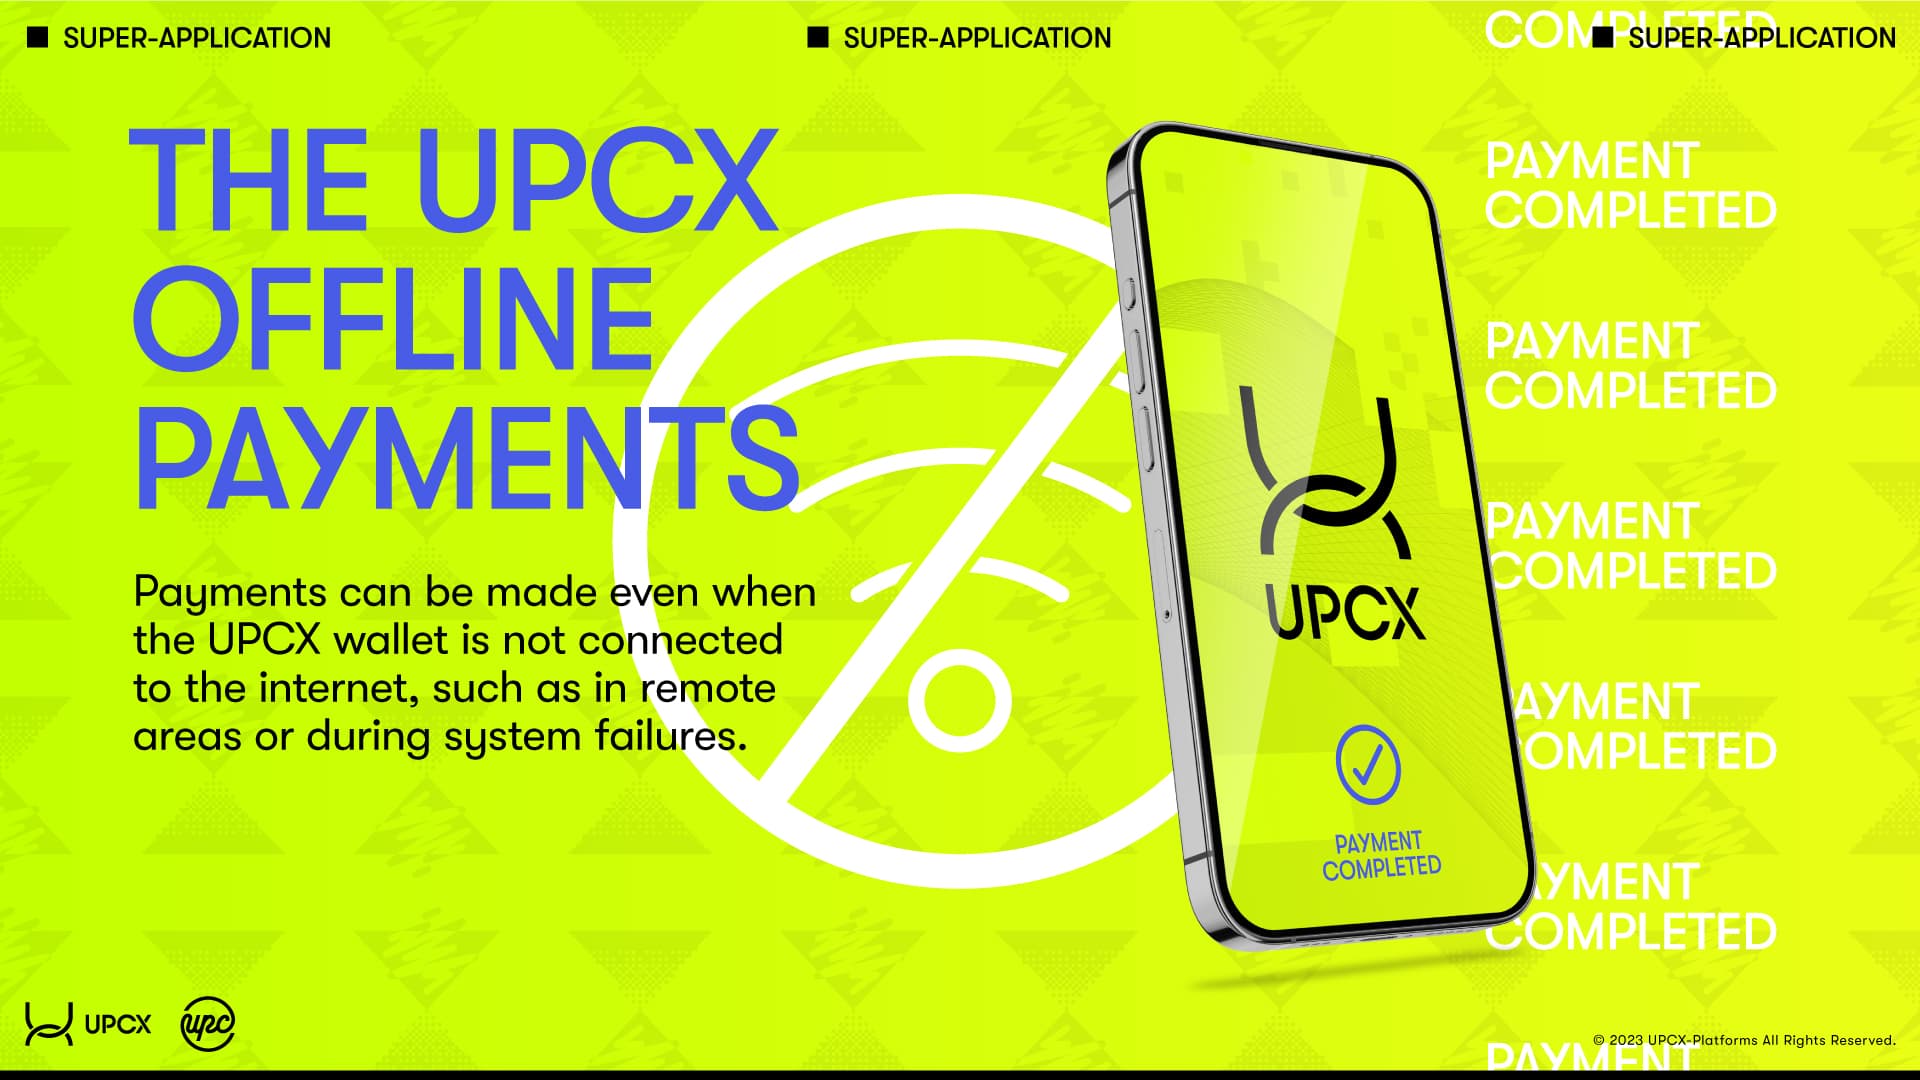 UPCX Offline Payments